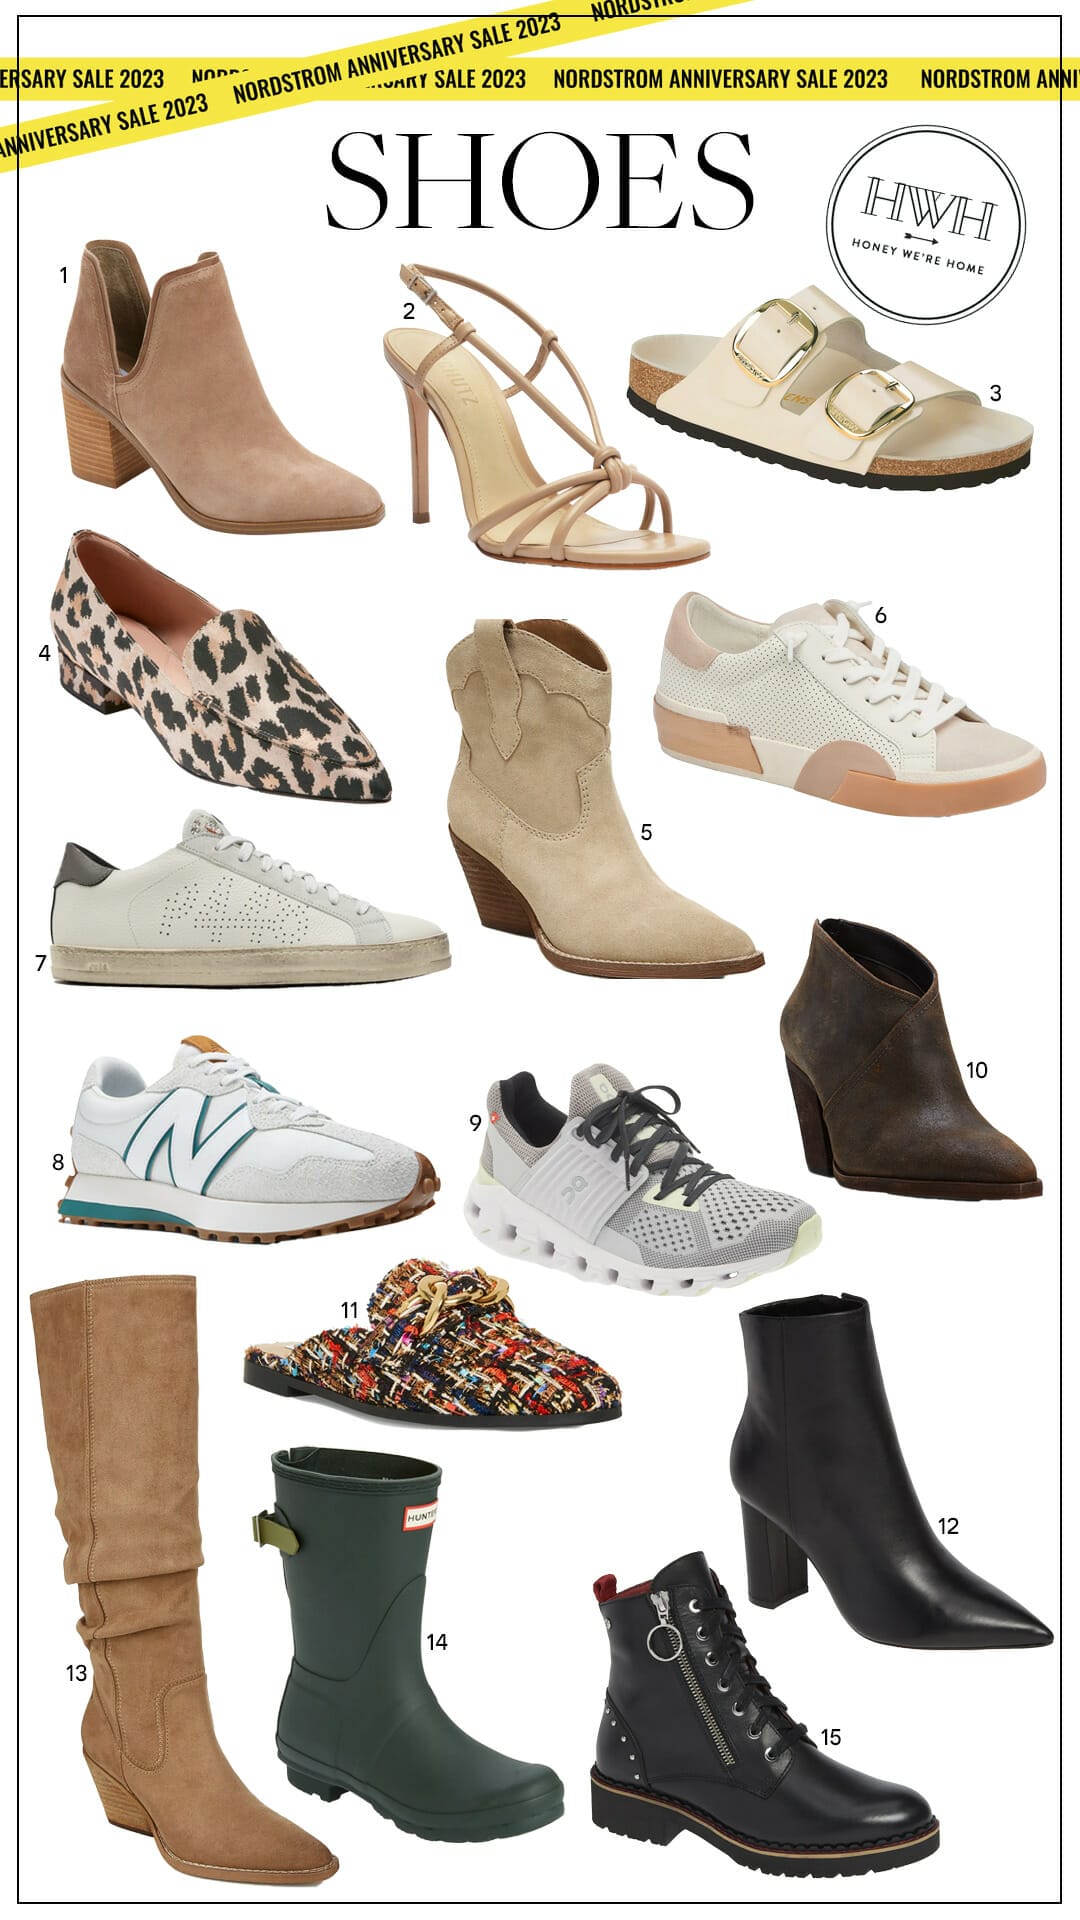 Nordstrom Shoes for Women for sale